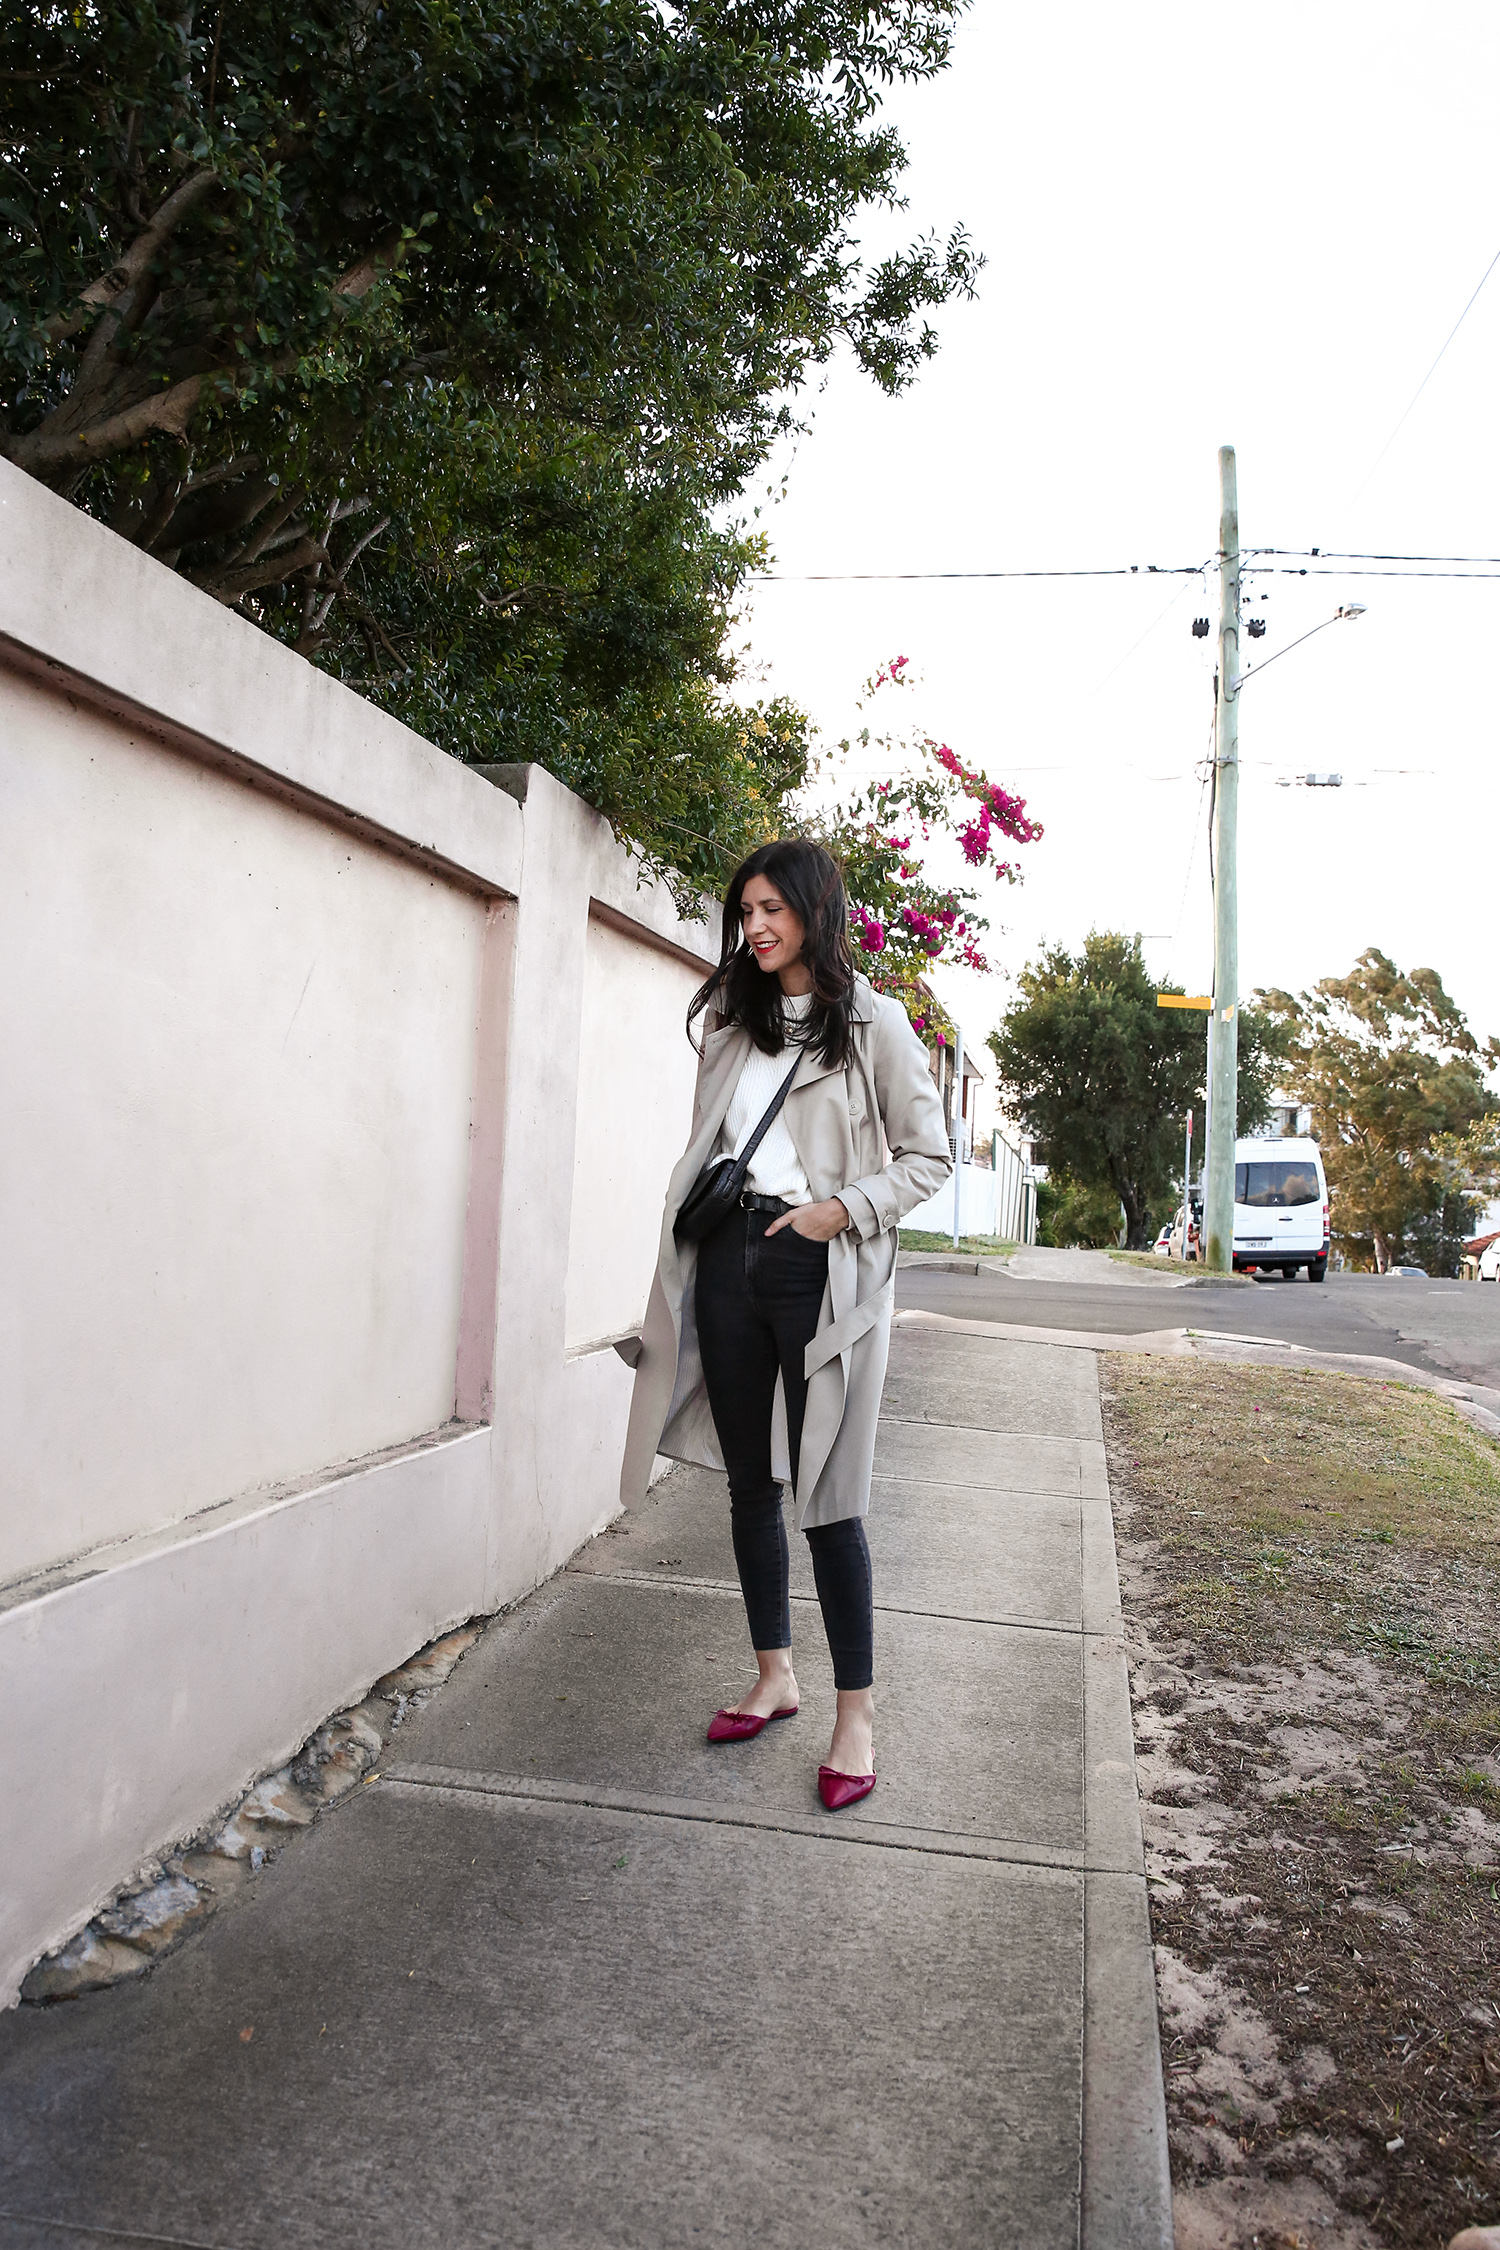 Jamie Lee of Mademoiselle wearing a minimal outfit with red shoes